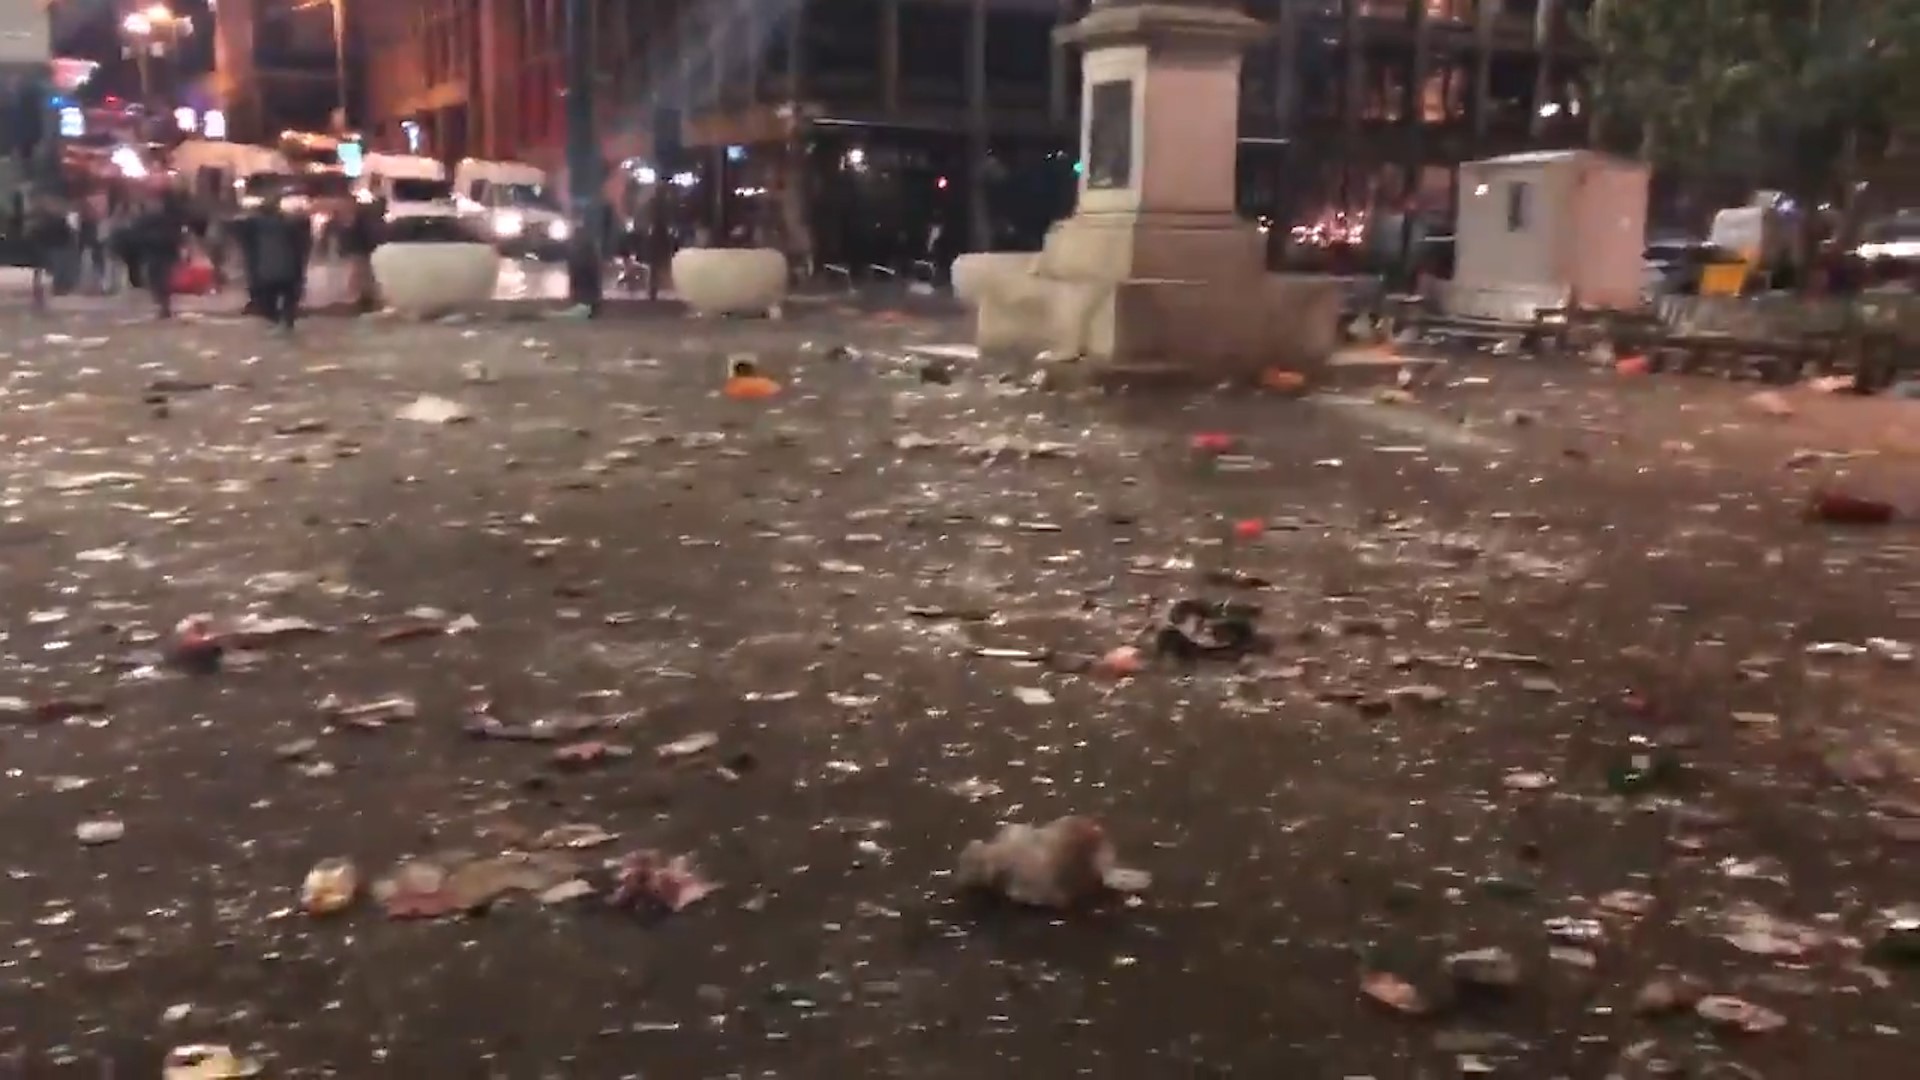 George Square was littered with broken glass, alcohol containers, spent flares and other rubbish.